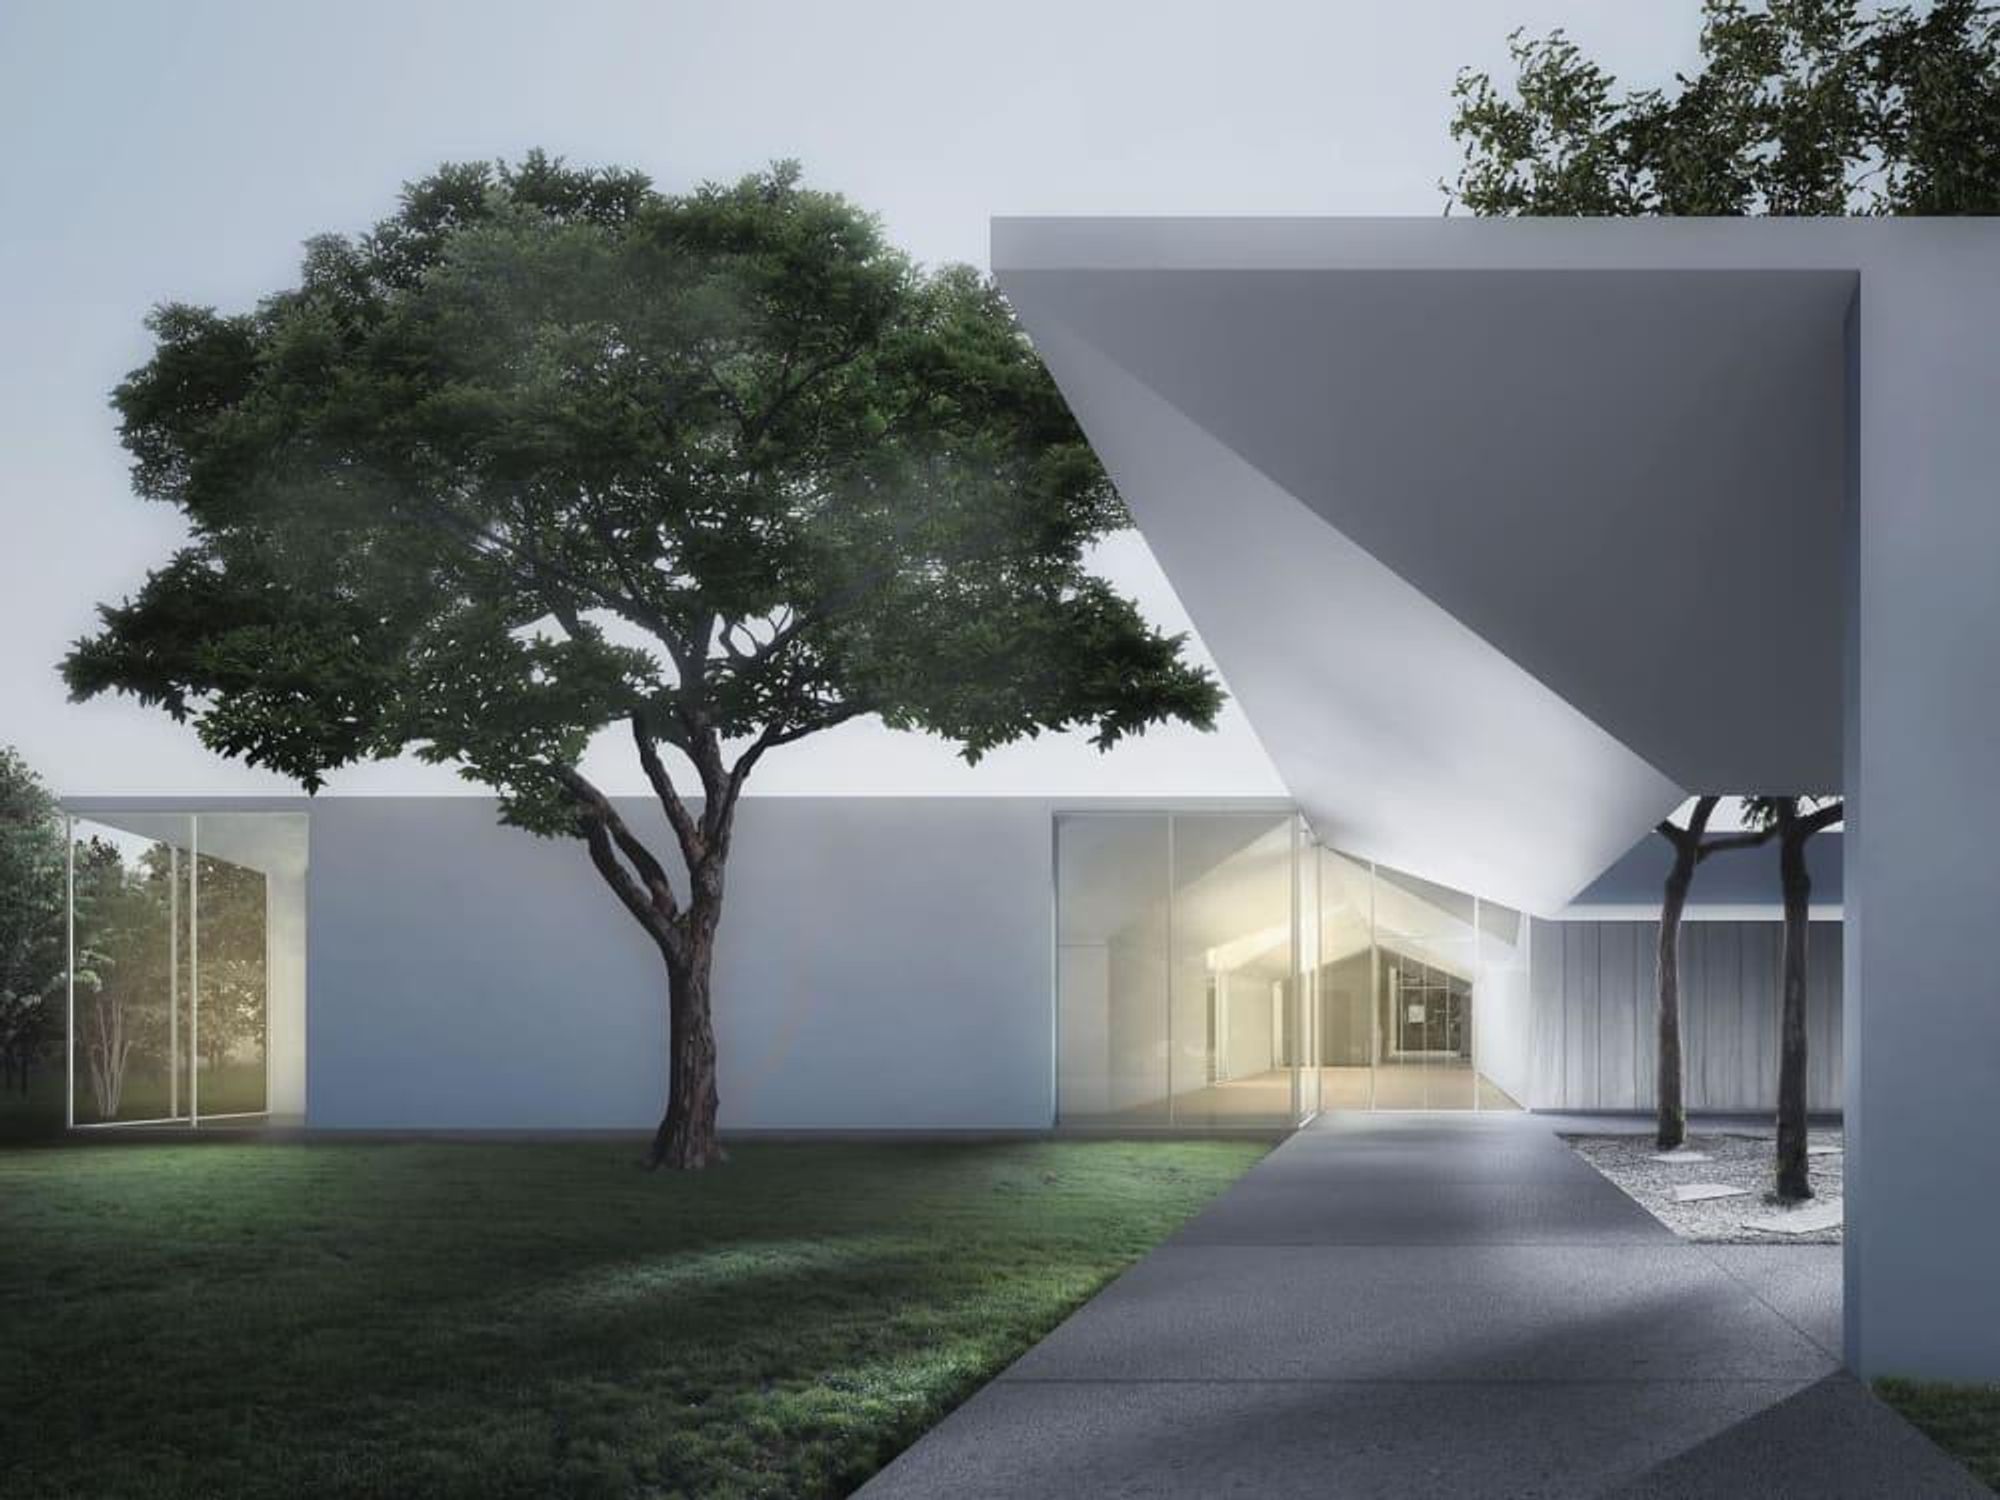 3. Menil Drawing Institute at dusk, looking past the west entrance courtyard